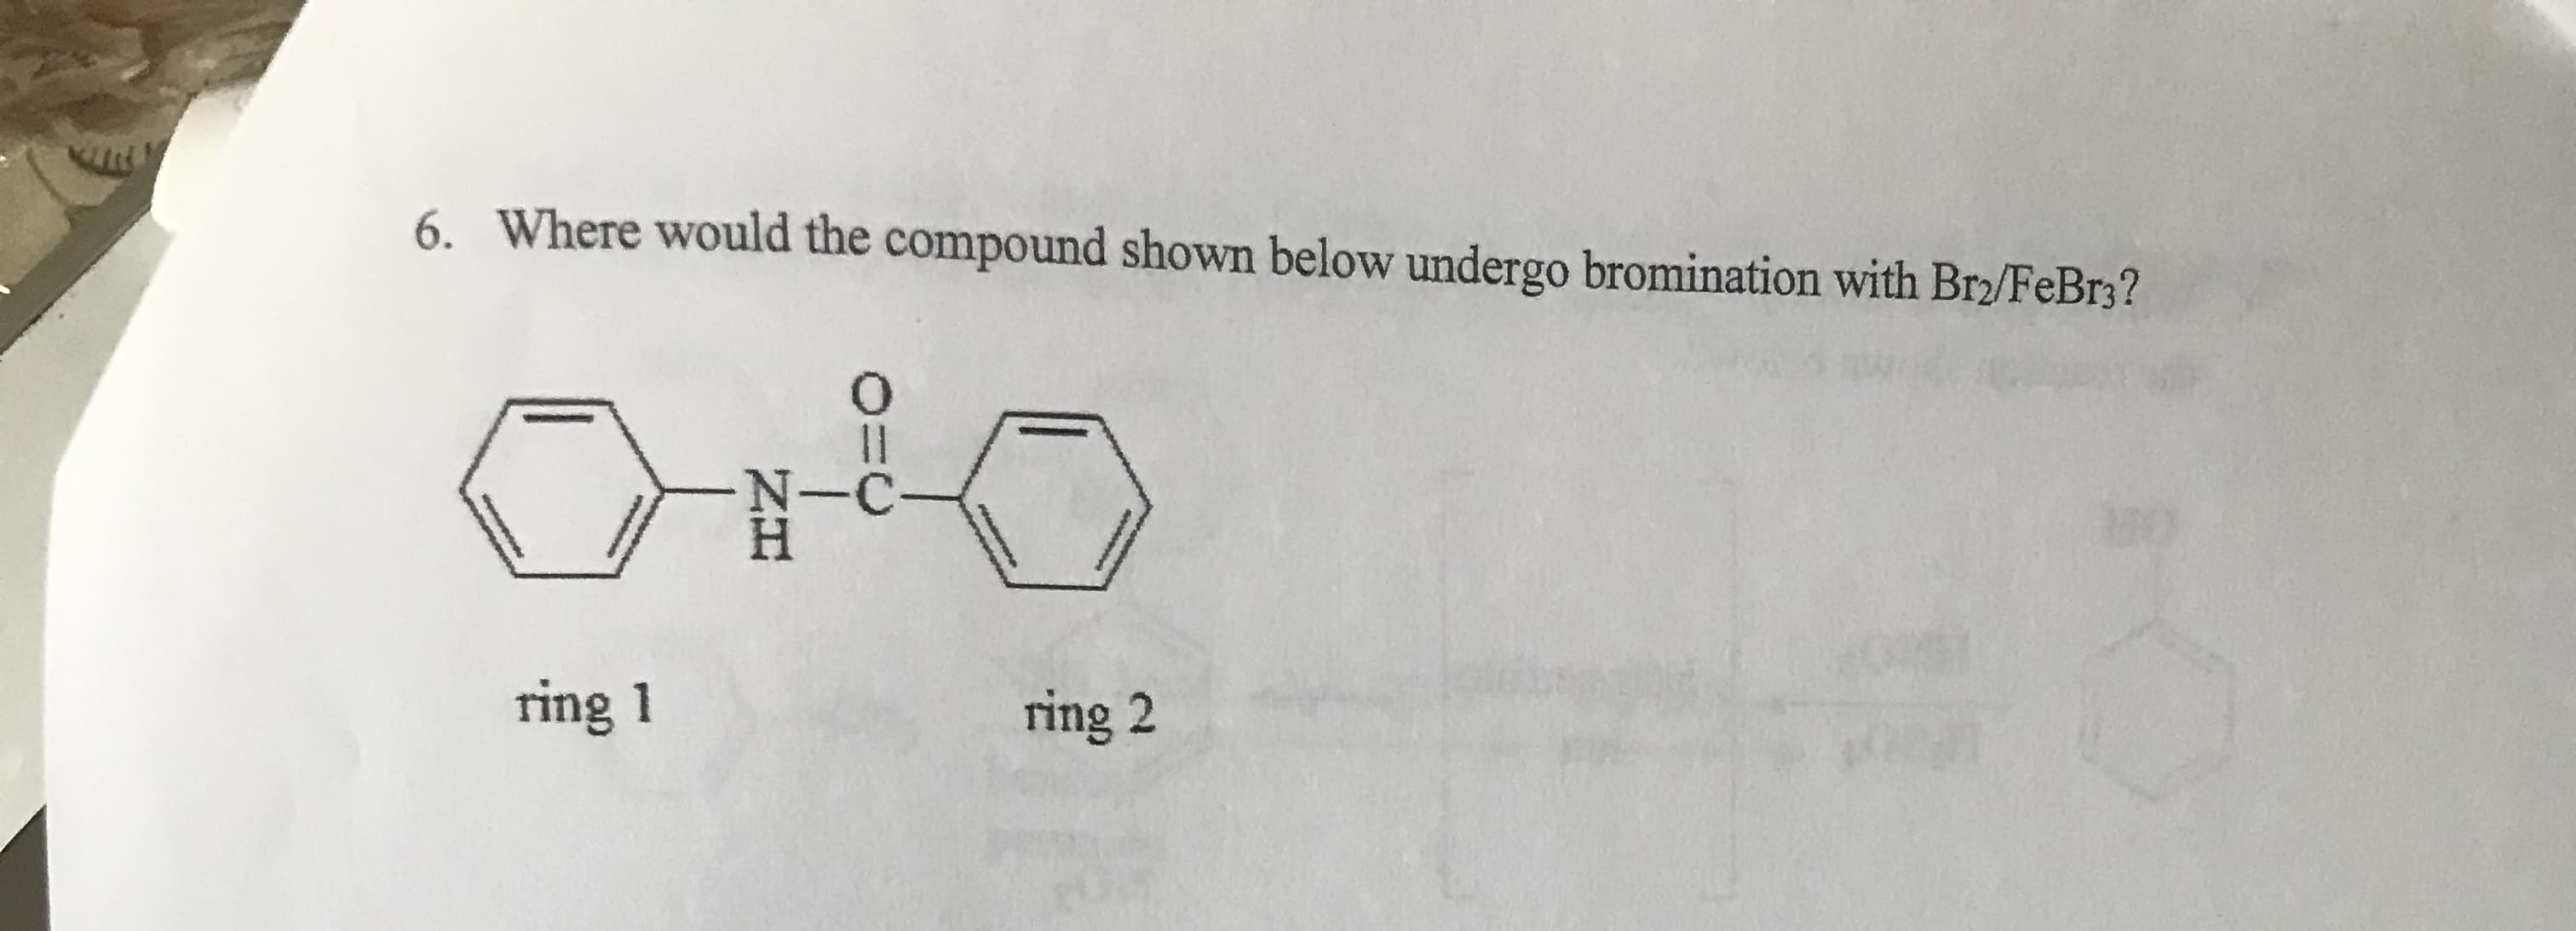 Where would the compound shown below undergo bromination with Bra/FeBr3?
6.
-N-C
ring 1
ring 2
